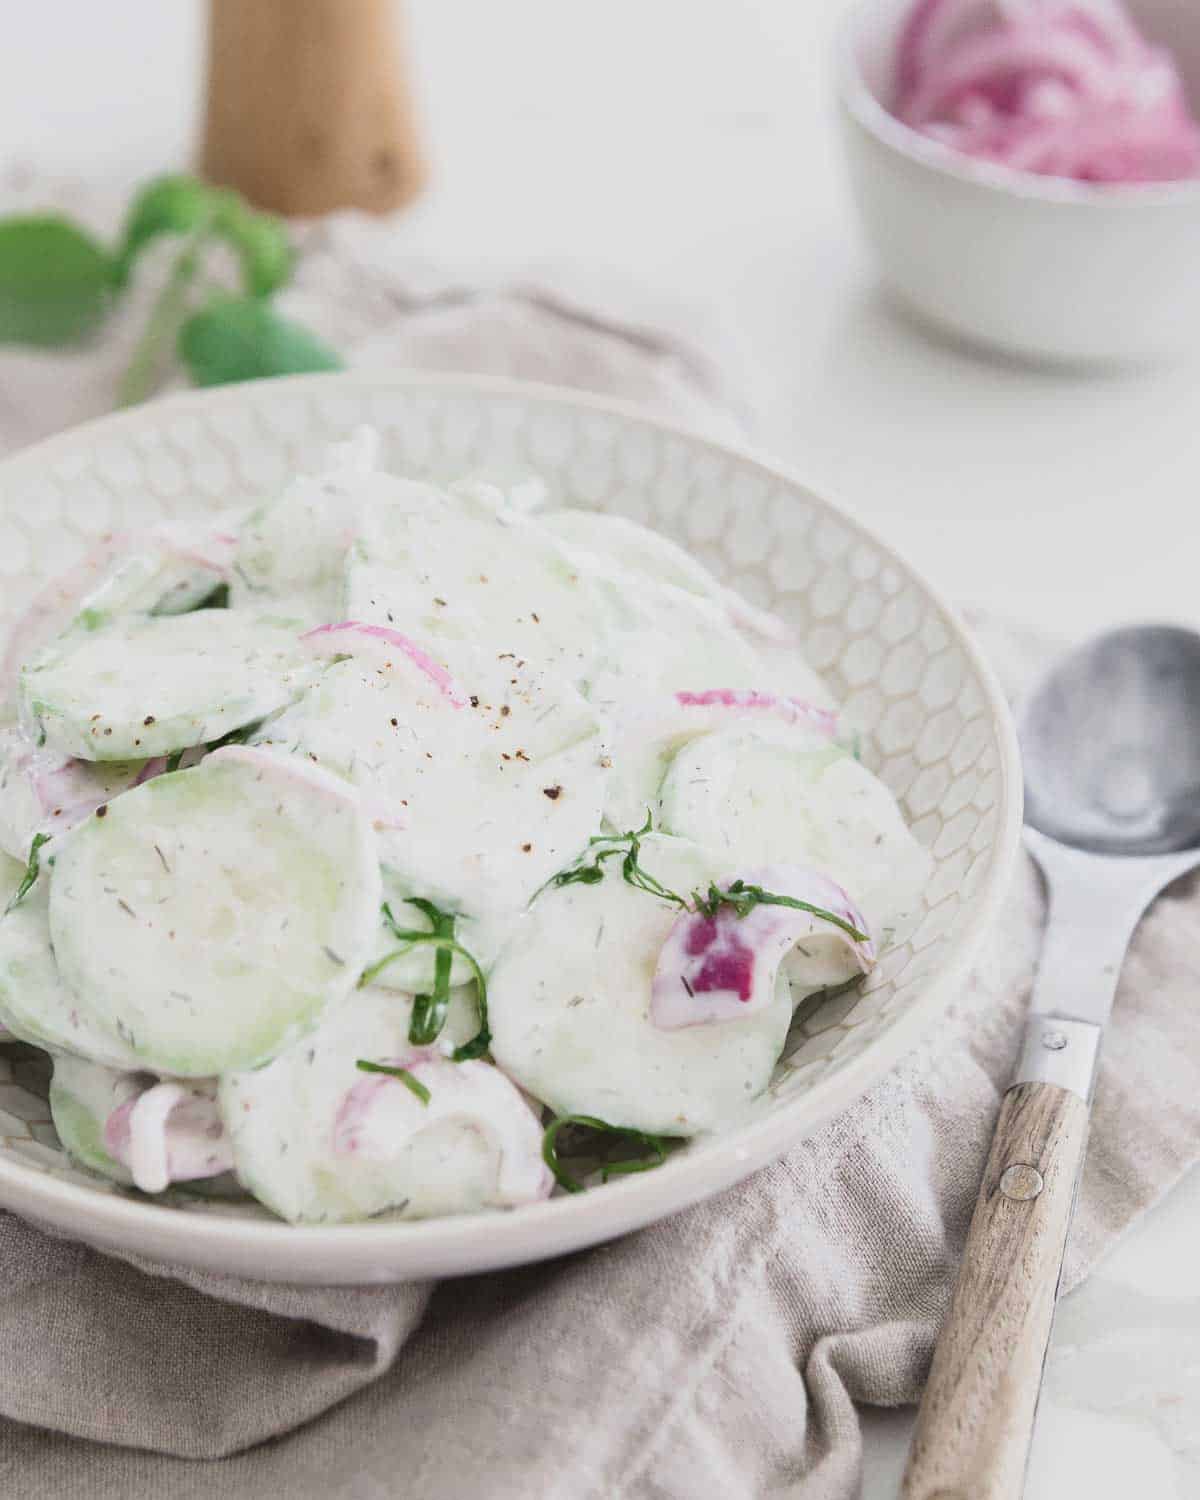 Skip the sour cream and mayo and try Greek yogurt in this healthier creamy cucumber salad recipe.